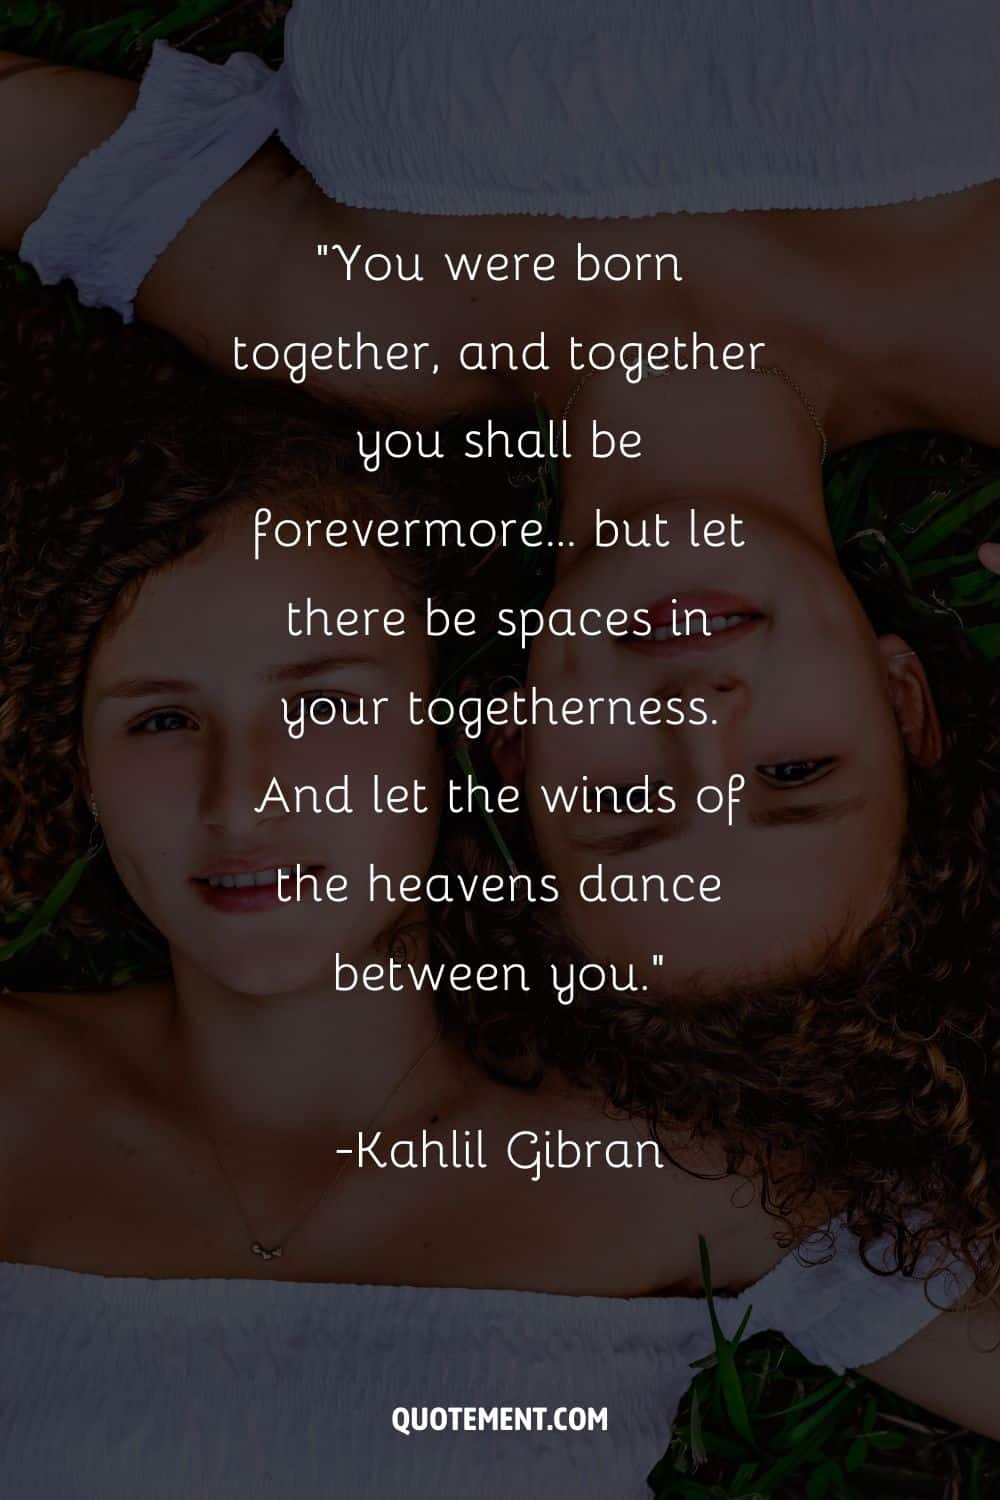 “You were born together, and together you shall be forevermore… but let there be spaces in your togethernes